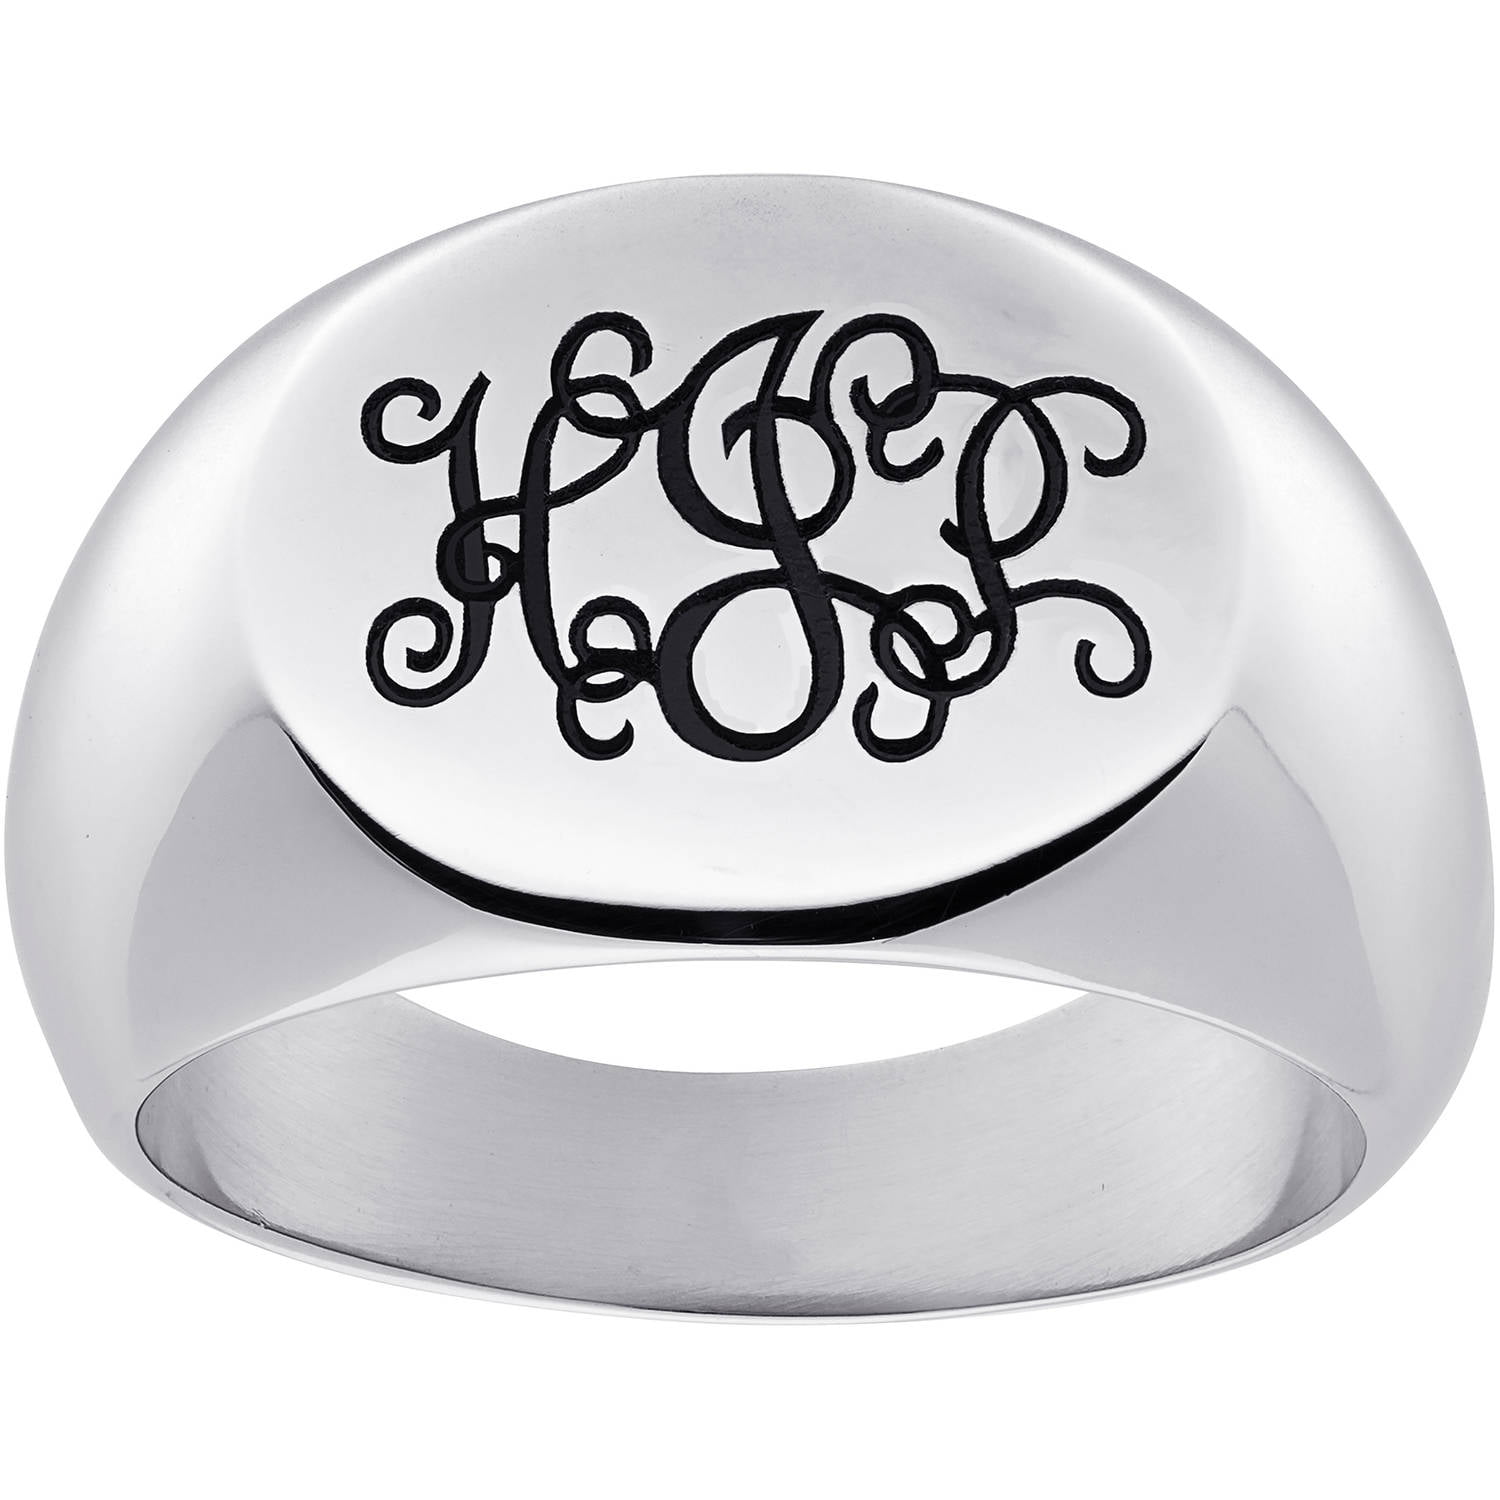 stainless steel signet ring